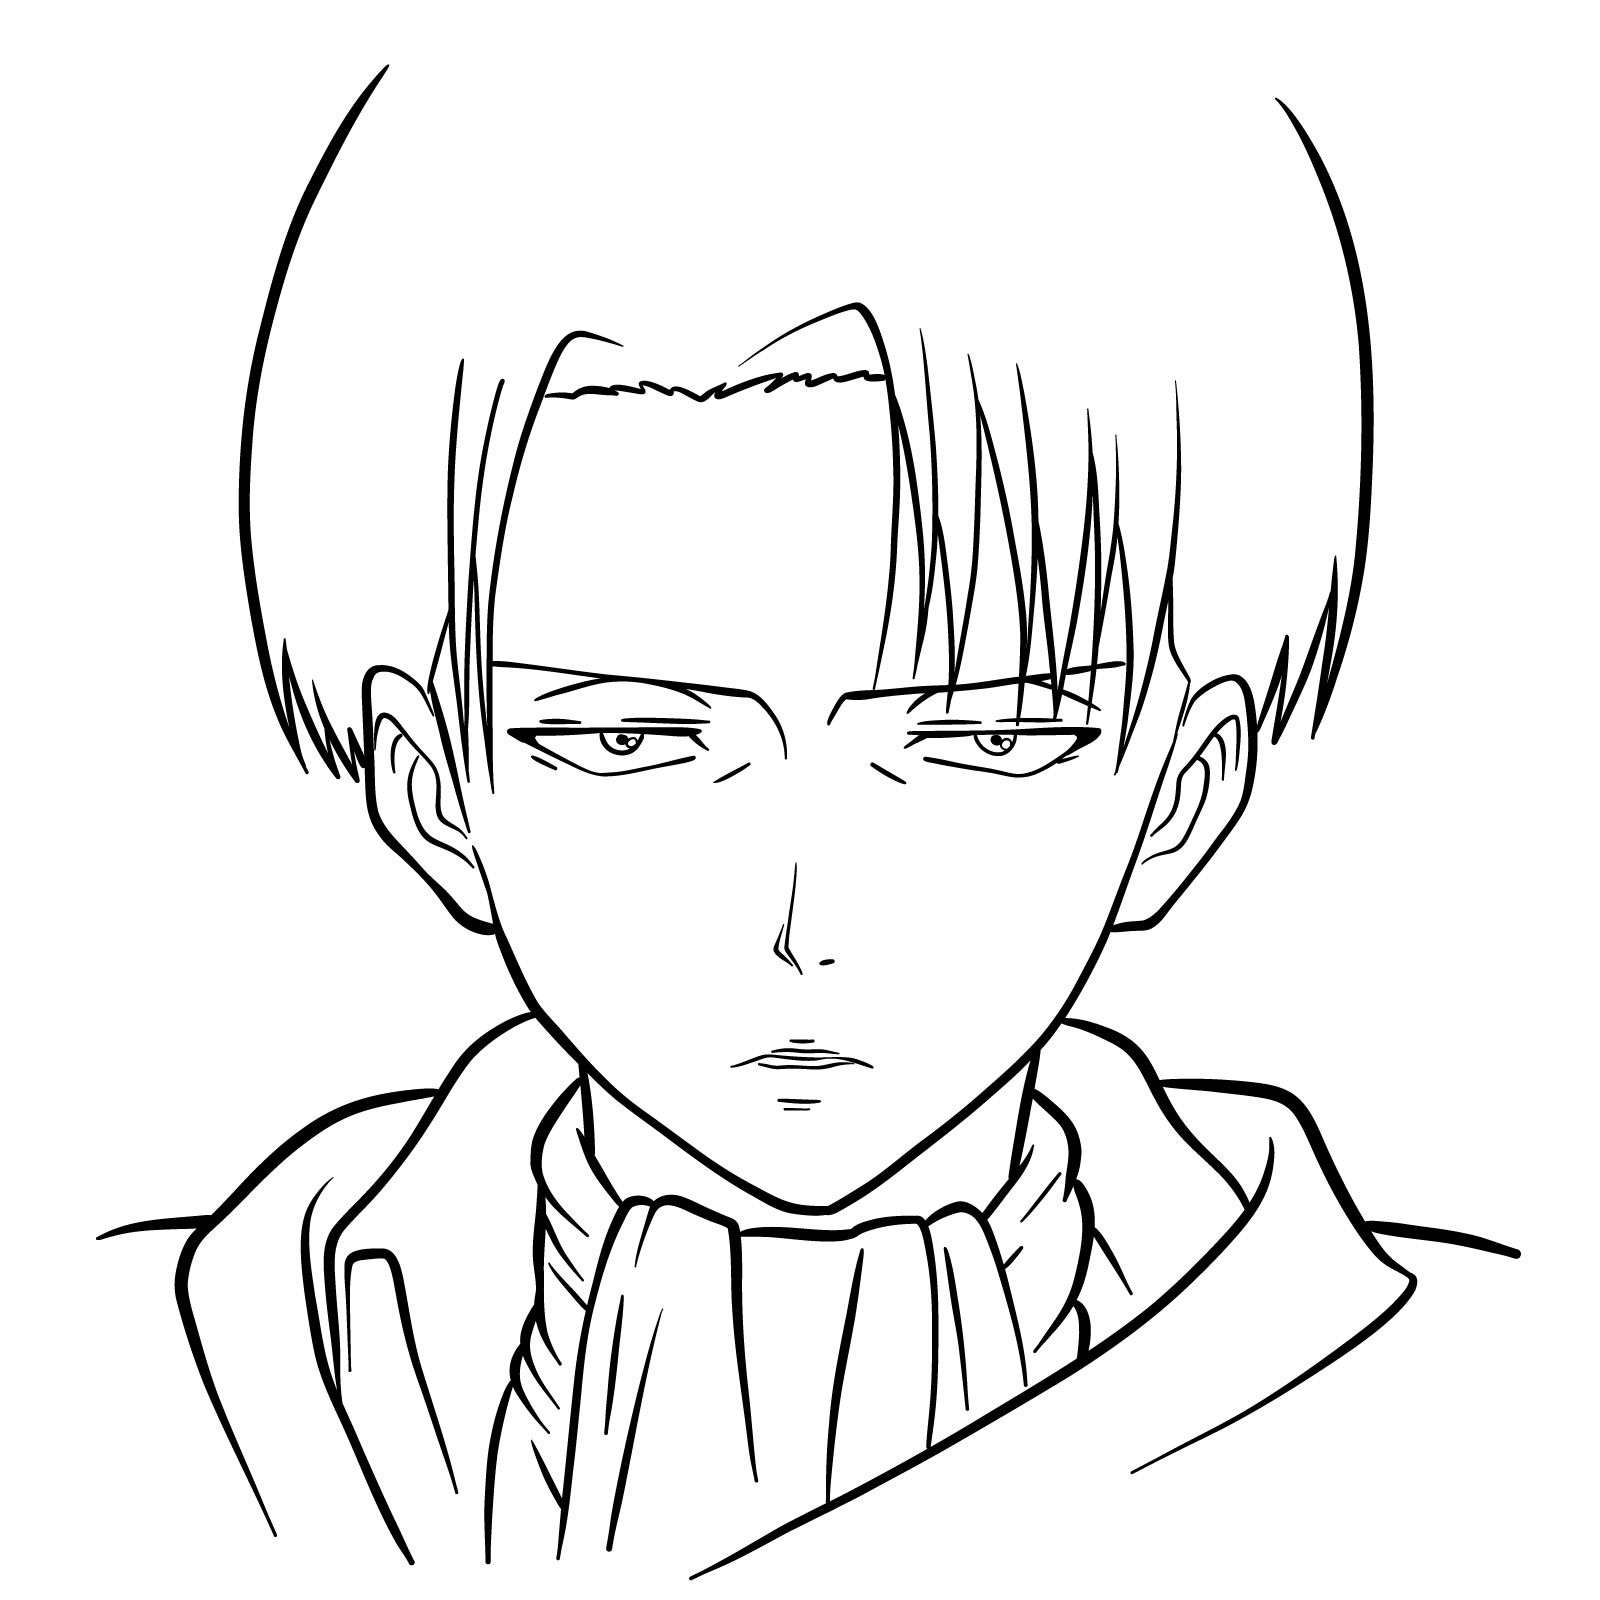 Easy drawing guide for Captain Levi's face front view - the finished drawing